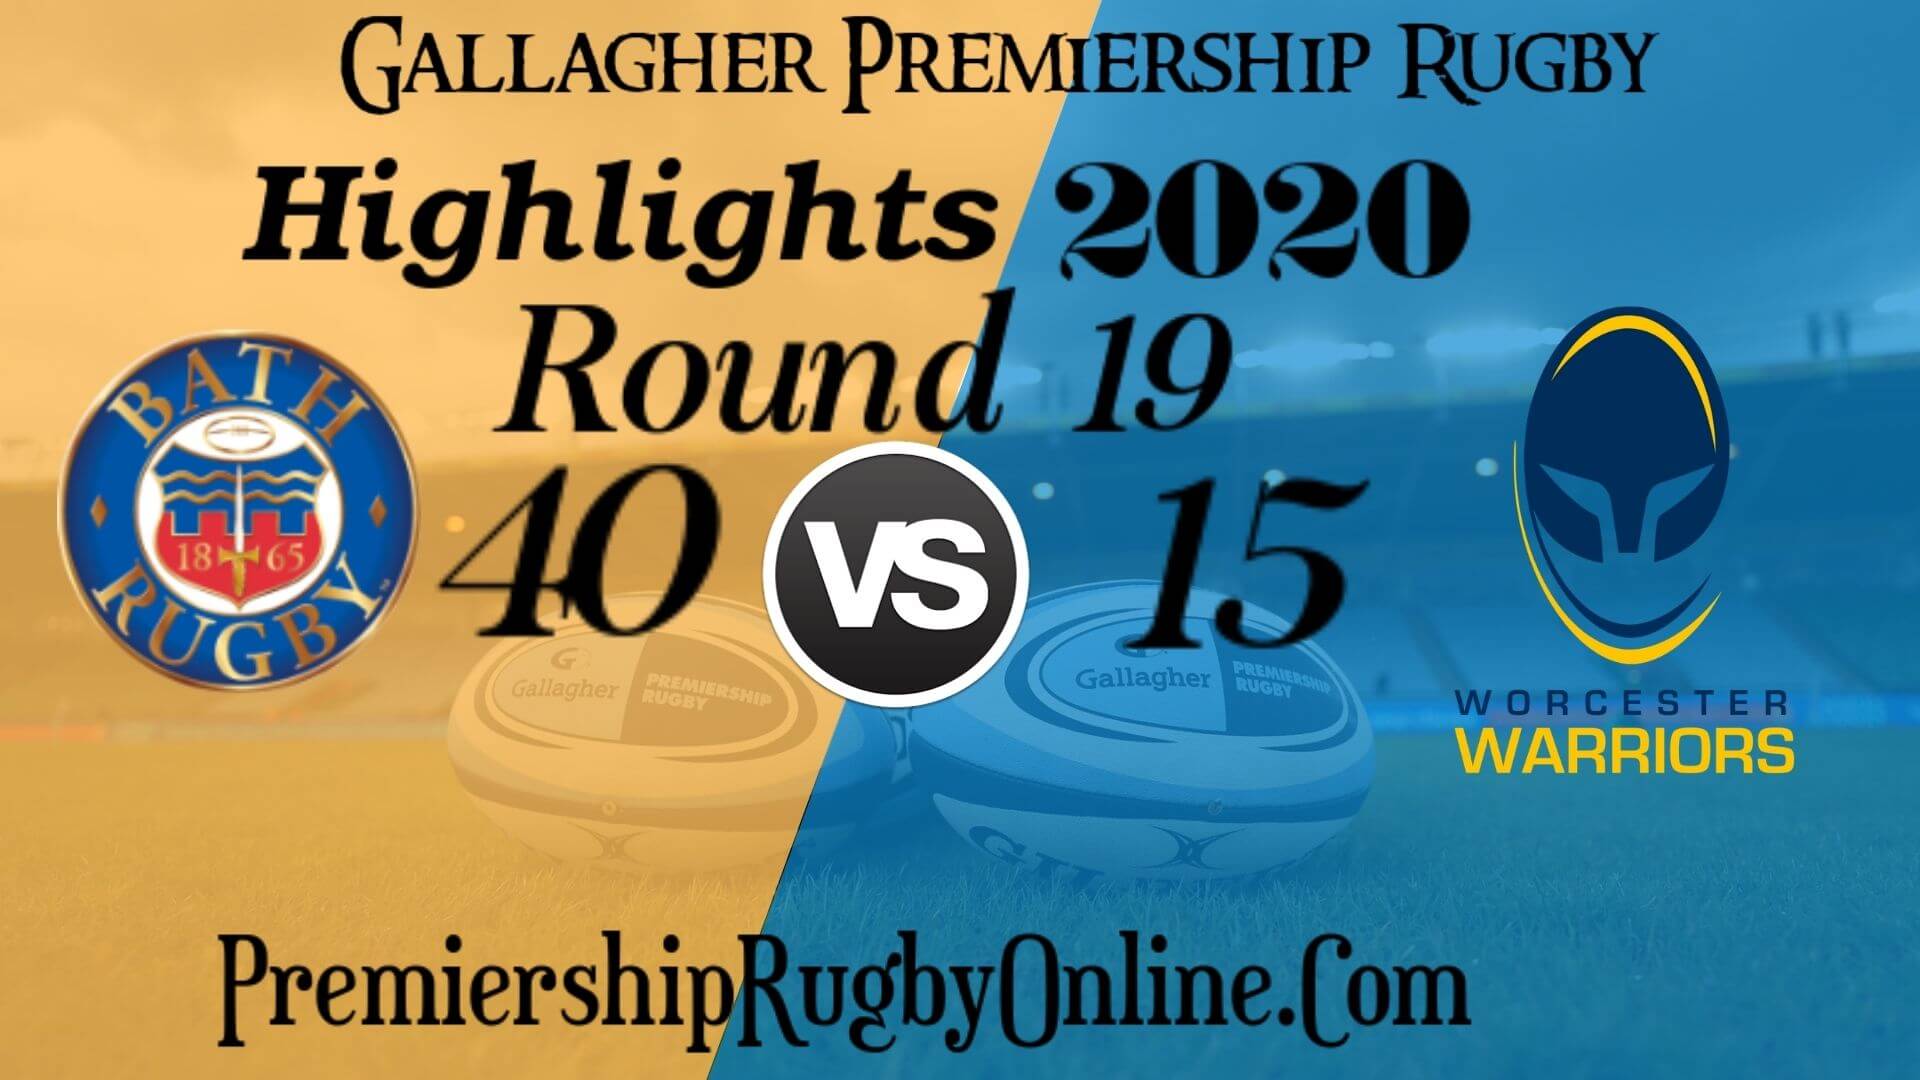 Bath Rugby vs Worcester Warriors Highlights 2020 RD 19